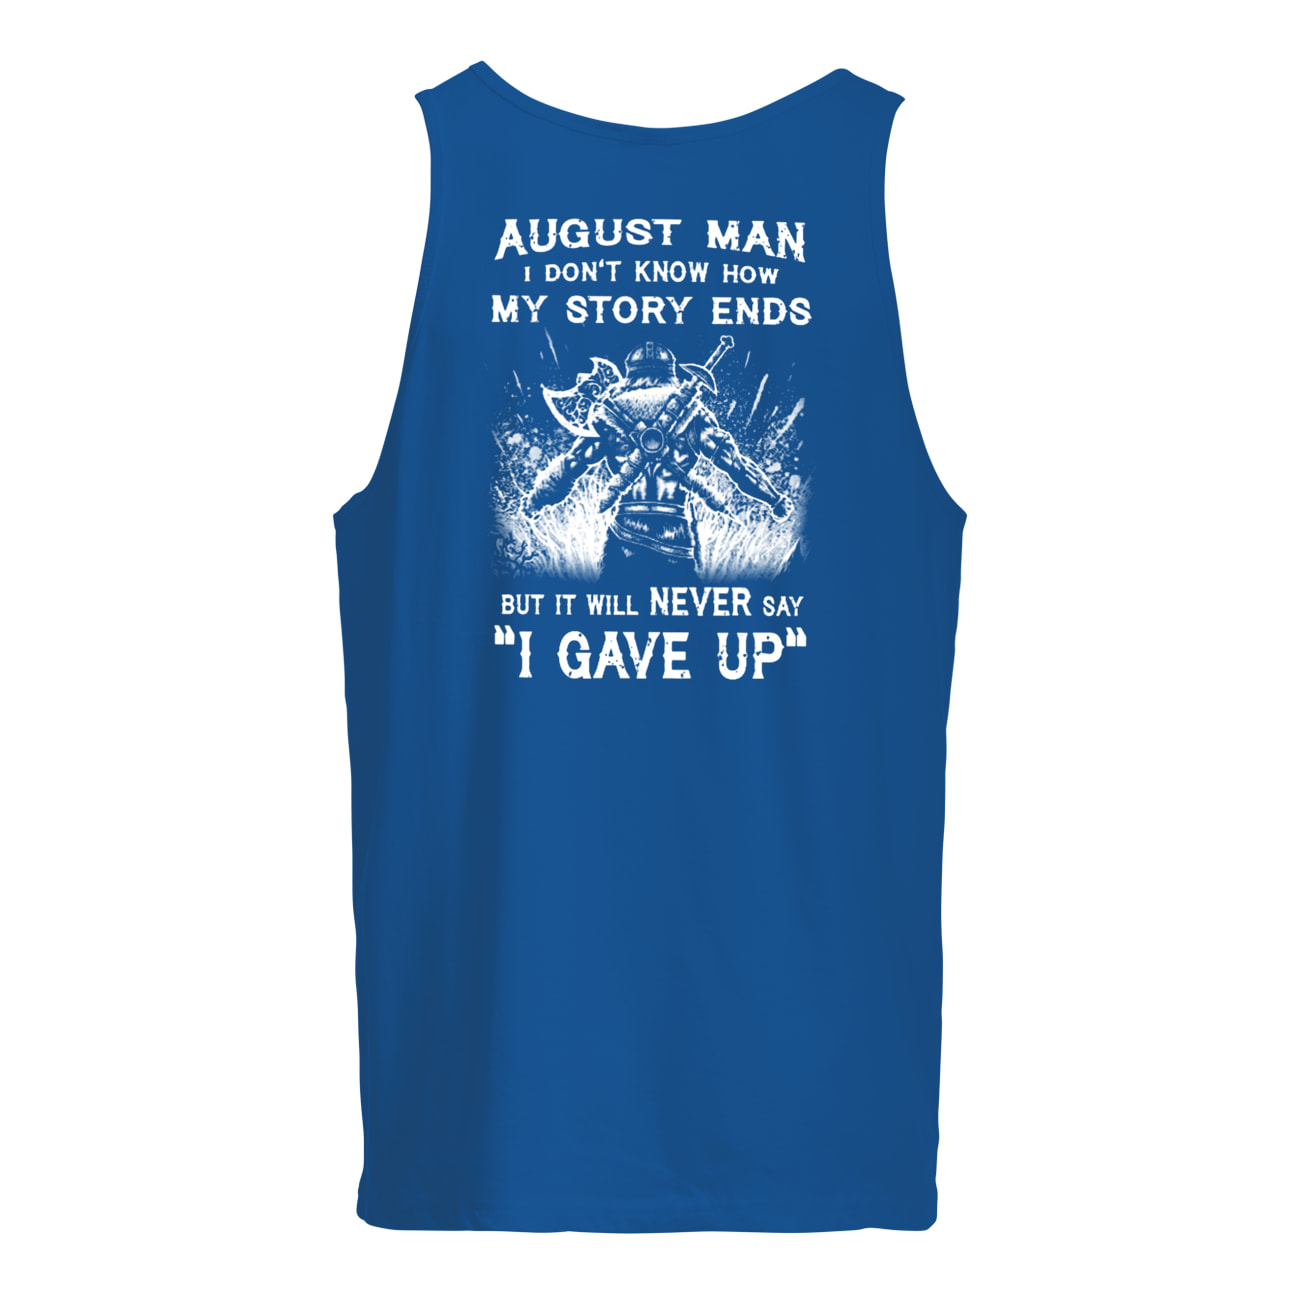 August man I don't know how my story ends viking tank top